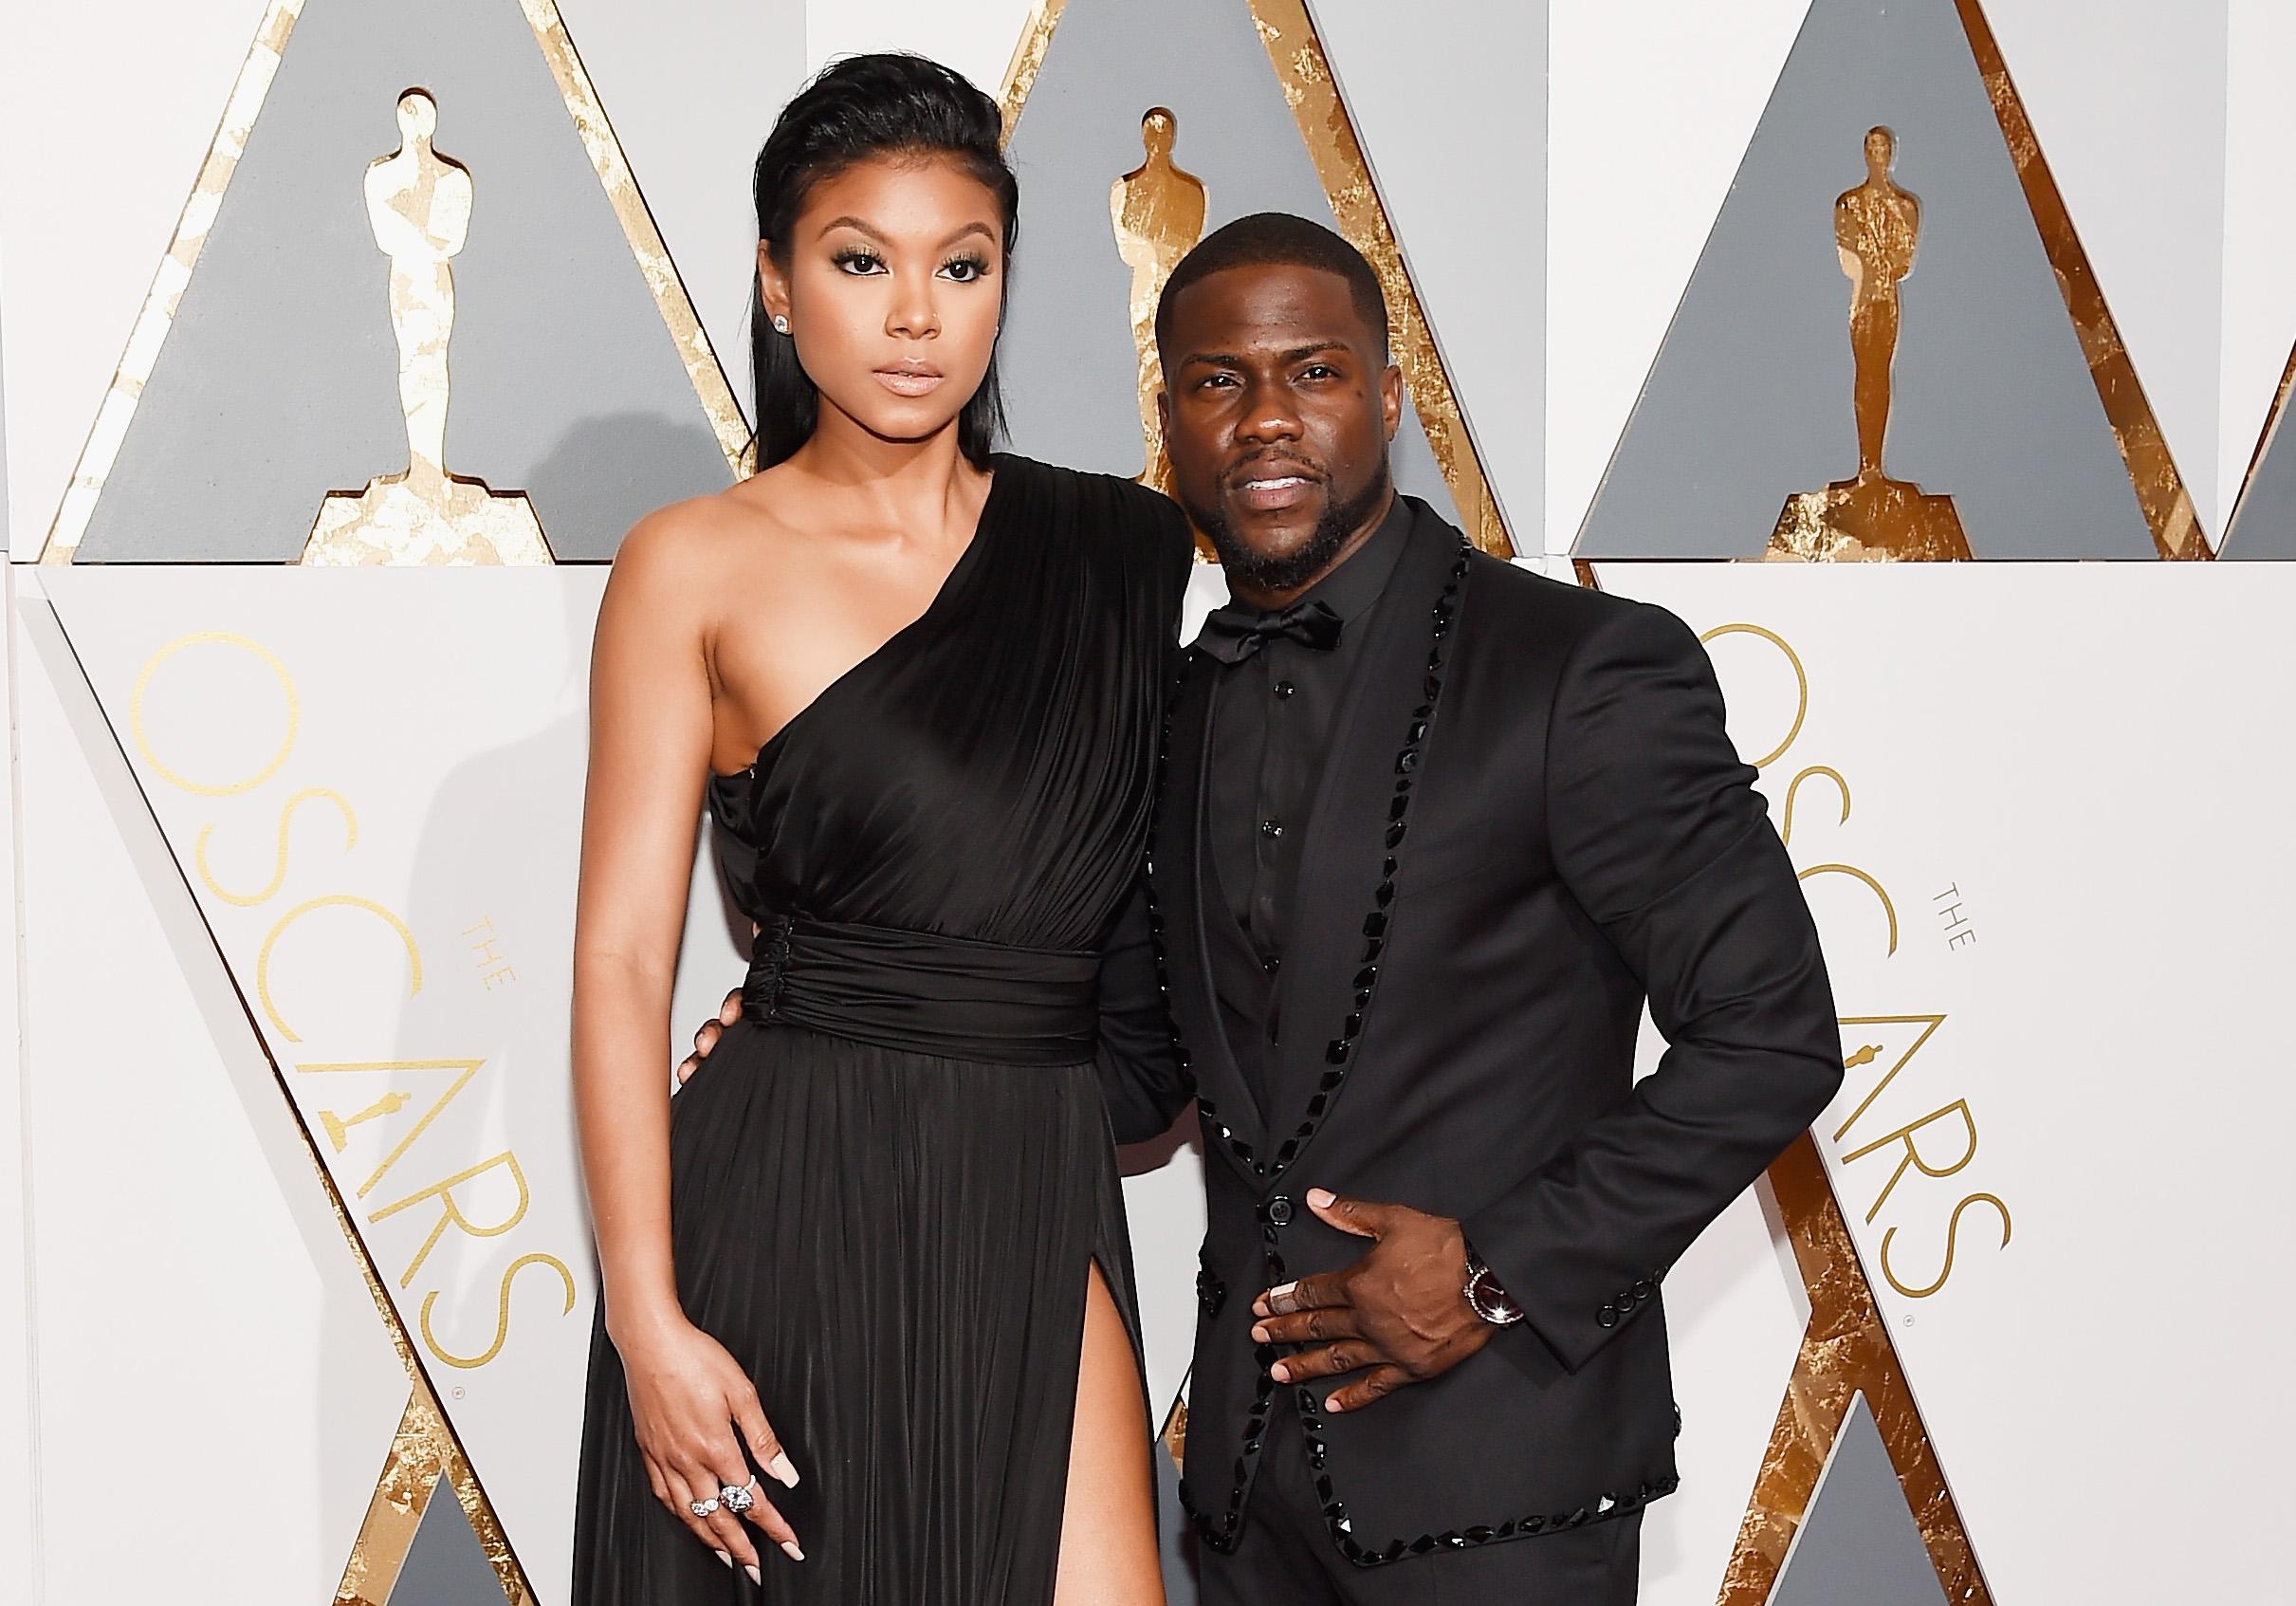 Kevin Hart Alleged sex tape extortion plot investigated by FBI pic